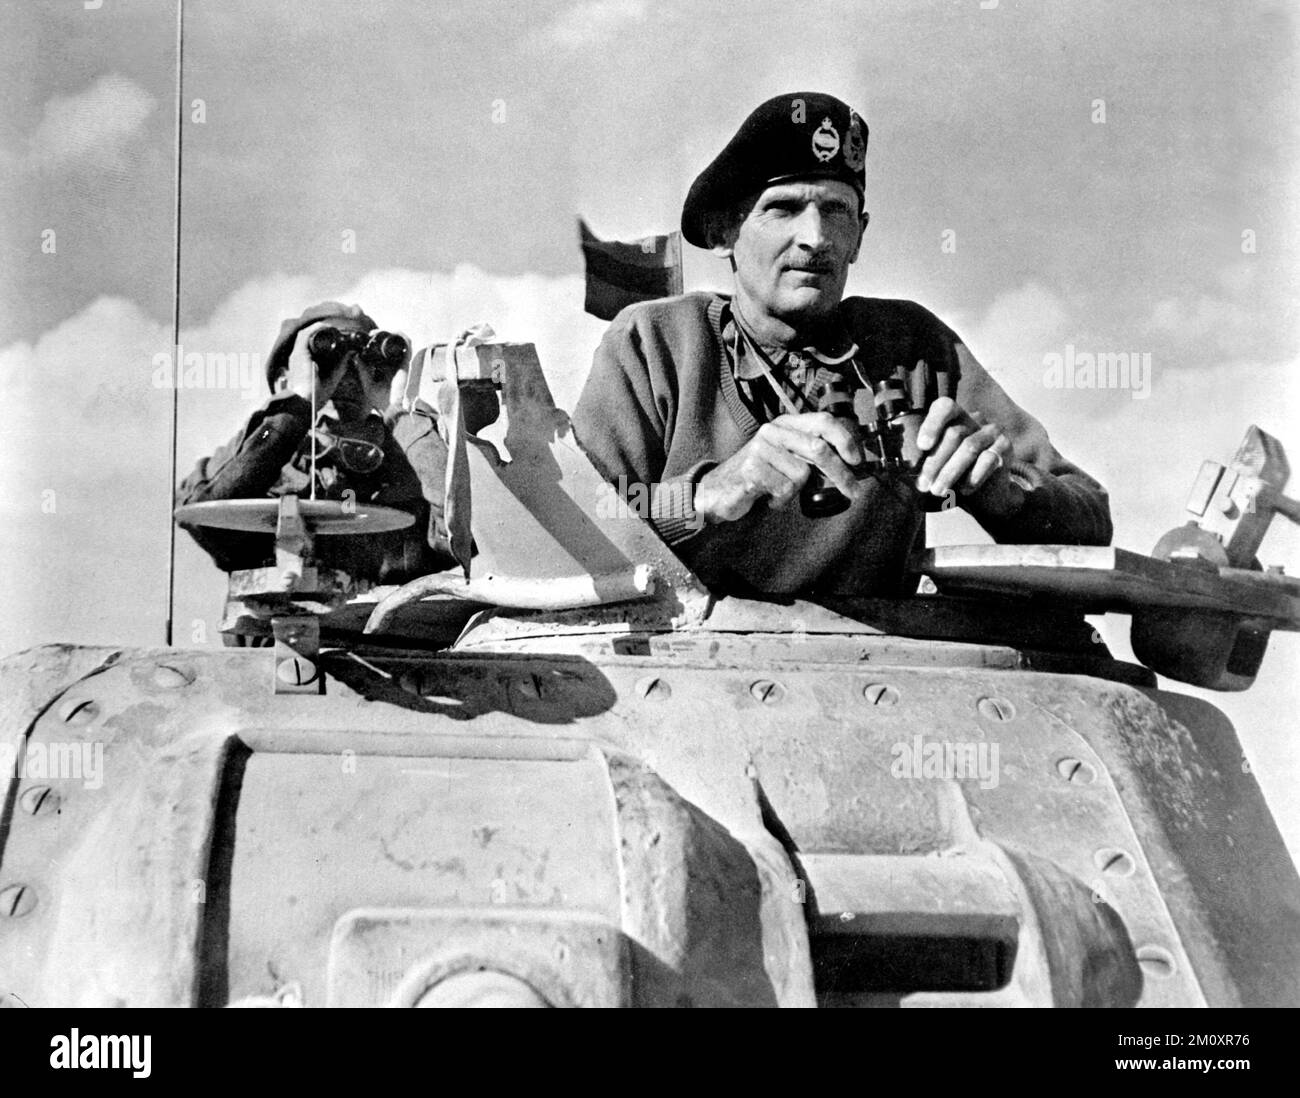 Montgomery in a Grant tank in North Africa, November 1942. Monty, General Montgomery, General Sir Bernard Montgomery in England, 1943 Portrait of the Commander of the Eighth Army General Sir Bernard Montgomery taken during a visit to England. Field Marshal Bernard Law Montgomery, 1st Viscount Montgomery of Alamein, (1887 – 1976), nicknamed 'Monty', was a senior British Army officer who served in the First World War, the Irish War of Independence and the Second World War Stock Photo